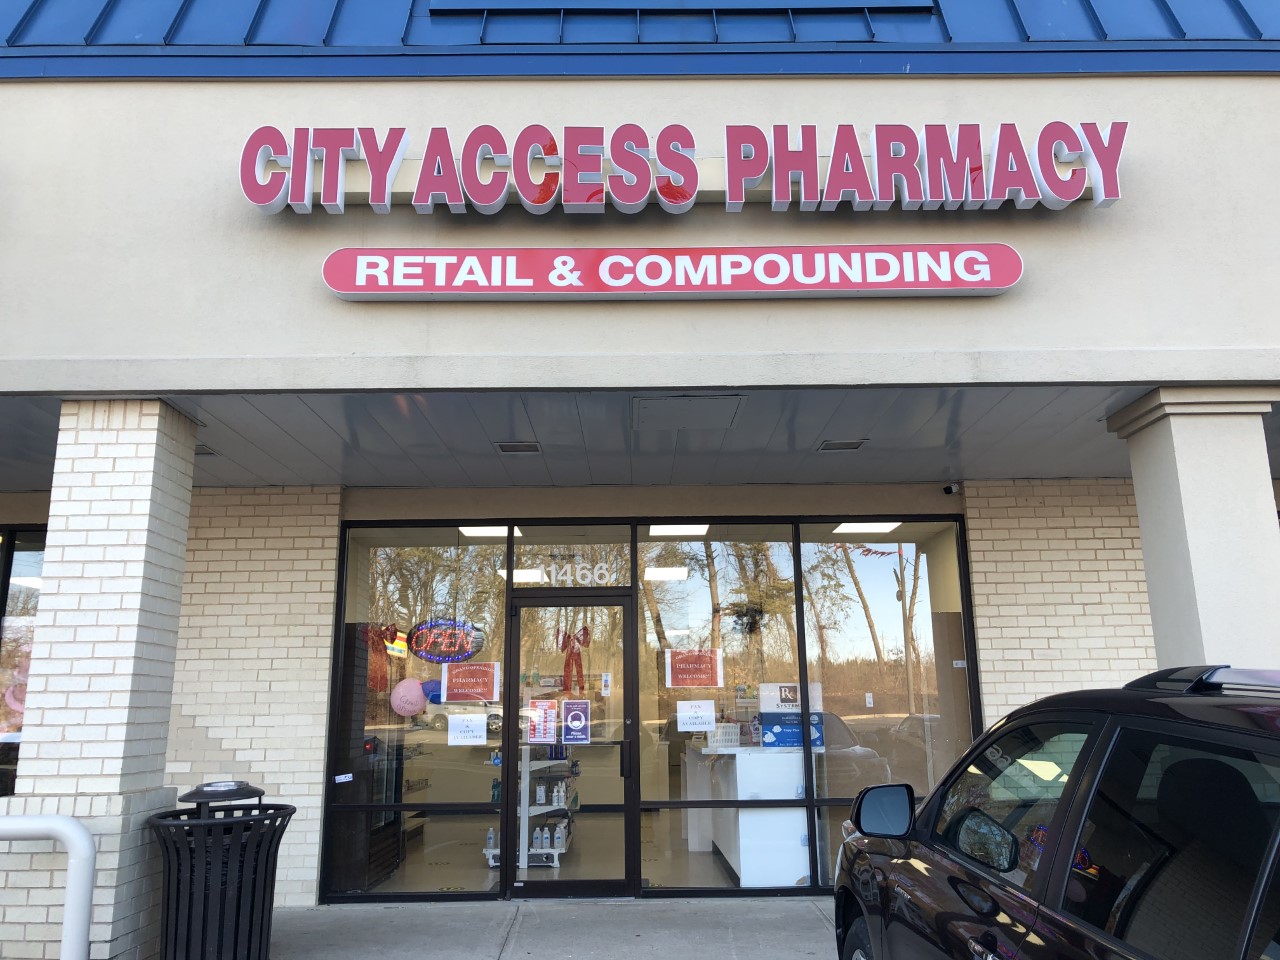 City Access Pharmacy (Retail & Compounding)